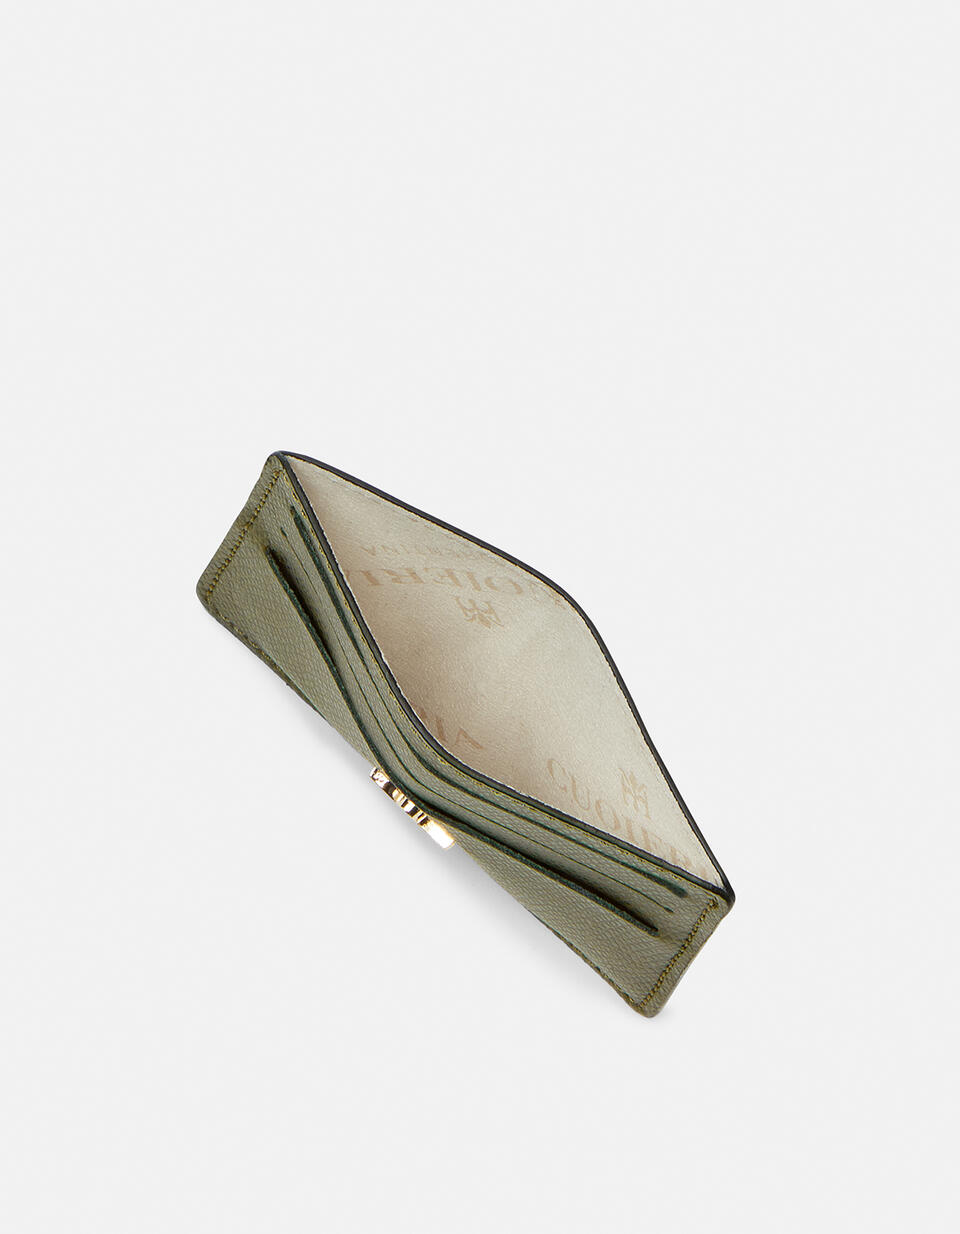 Bella credit car holder with space for banknotes - Card Holders - Women's Wallets | Wallets VERDE - Card Holders - Women's Wallets | WalletsCuoieria Fiorentina